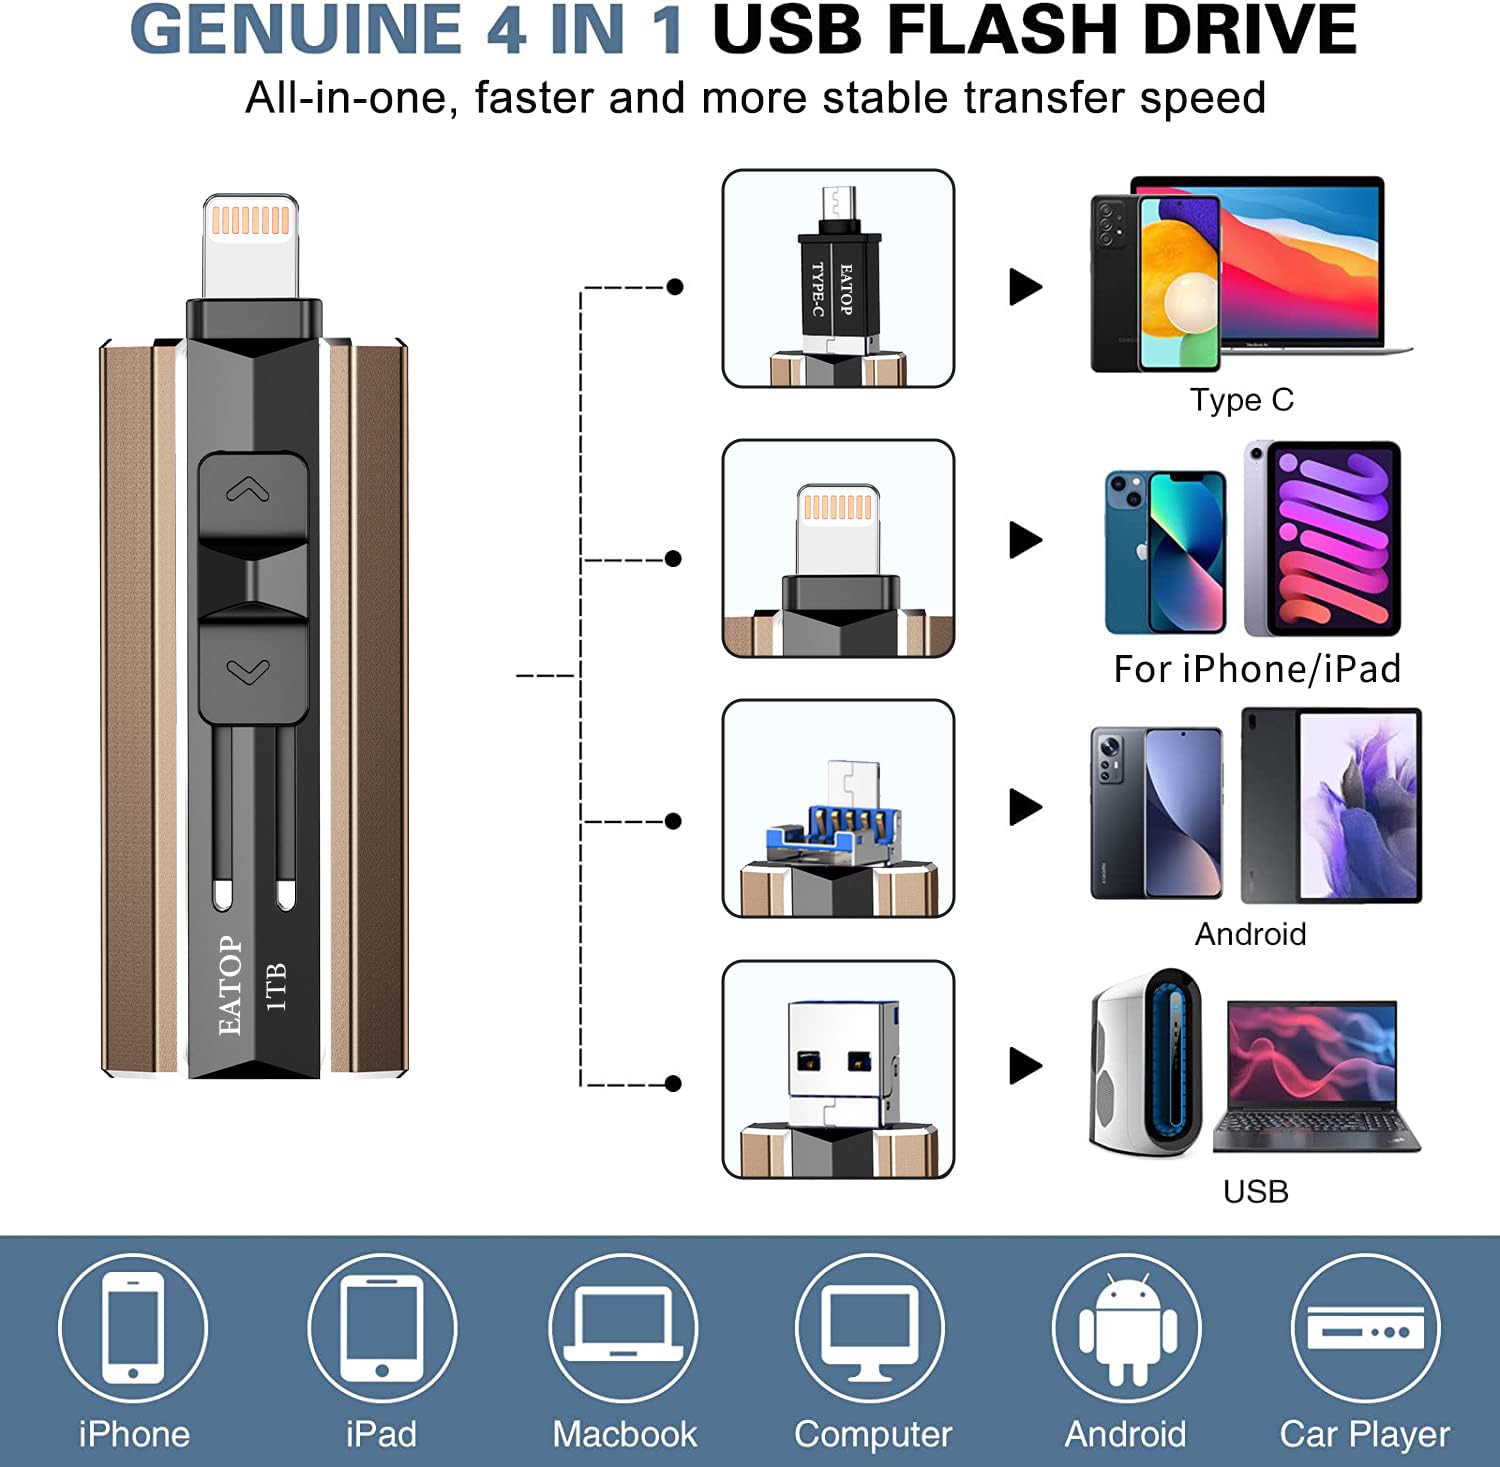 EATOP USB Flash Drive 1TB iPhone Memory Stick Storage for Photos and Videos, iPhone Photo Stick Storage Flash Thumb Drive Compatible with iPhone iPad Android and Computers (Brown)